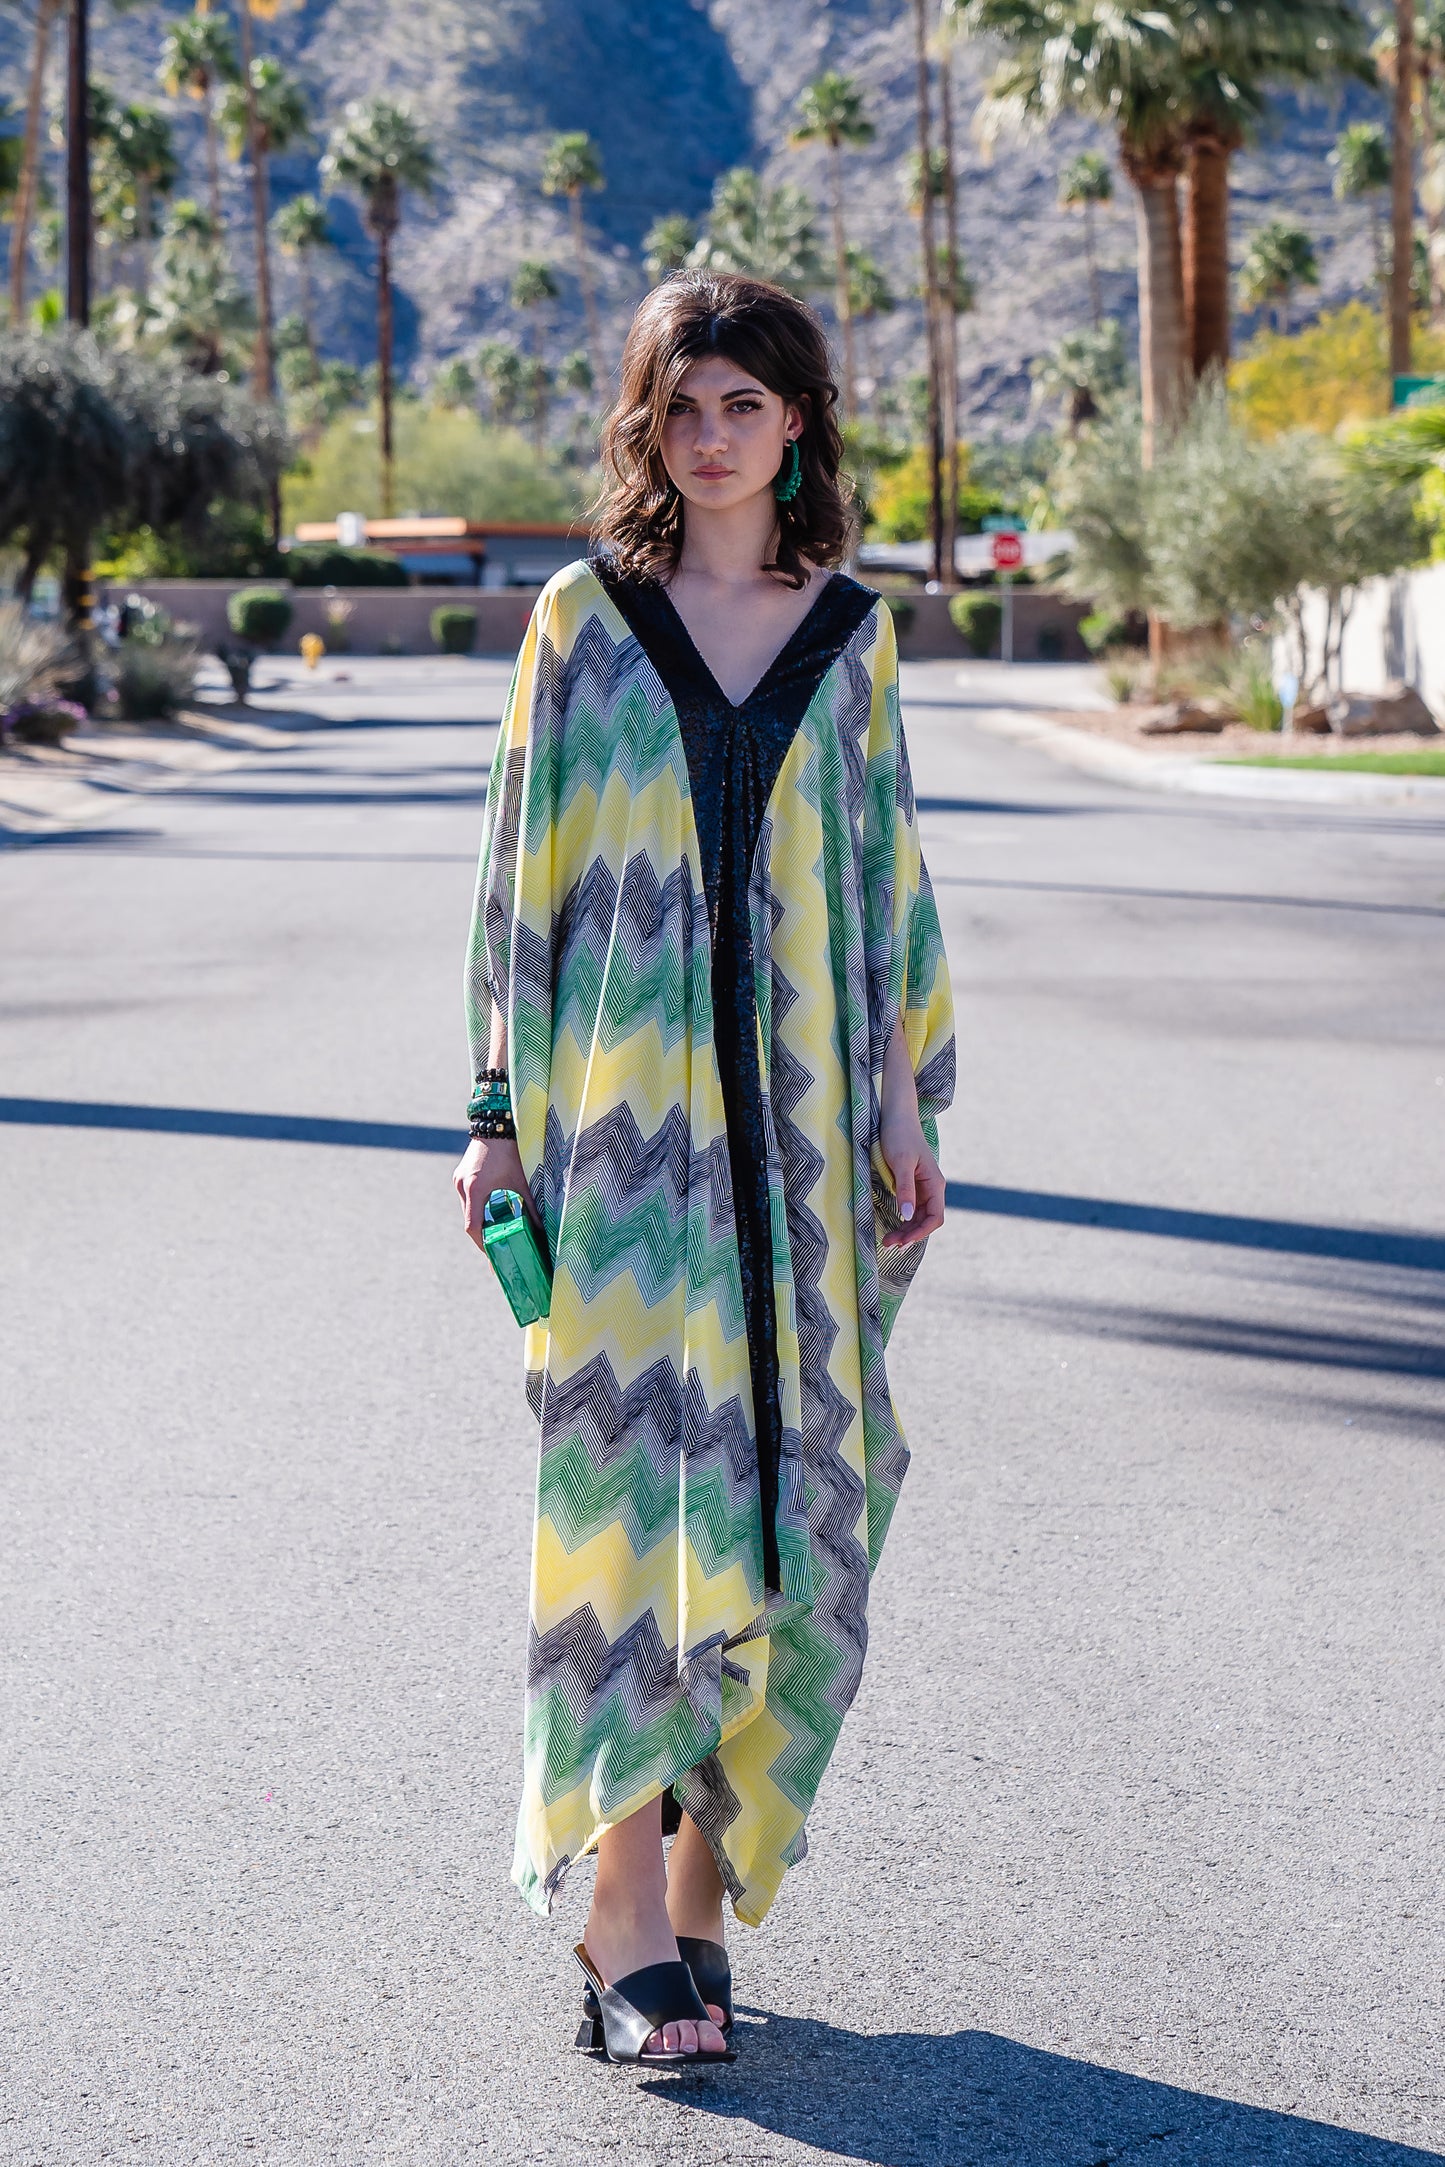 Jennafer Grace Fortuna Deluxe caftan black green yellow white striped chevron print with black sequin lapel down front and back, creating a Y shaped design. V neck with batwing sleeves and ankle length hem.  Unisex handmade in California USA